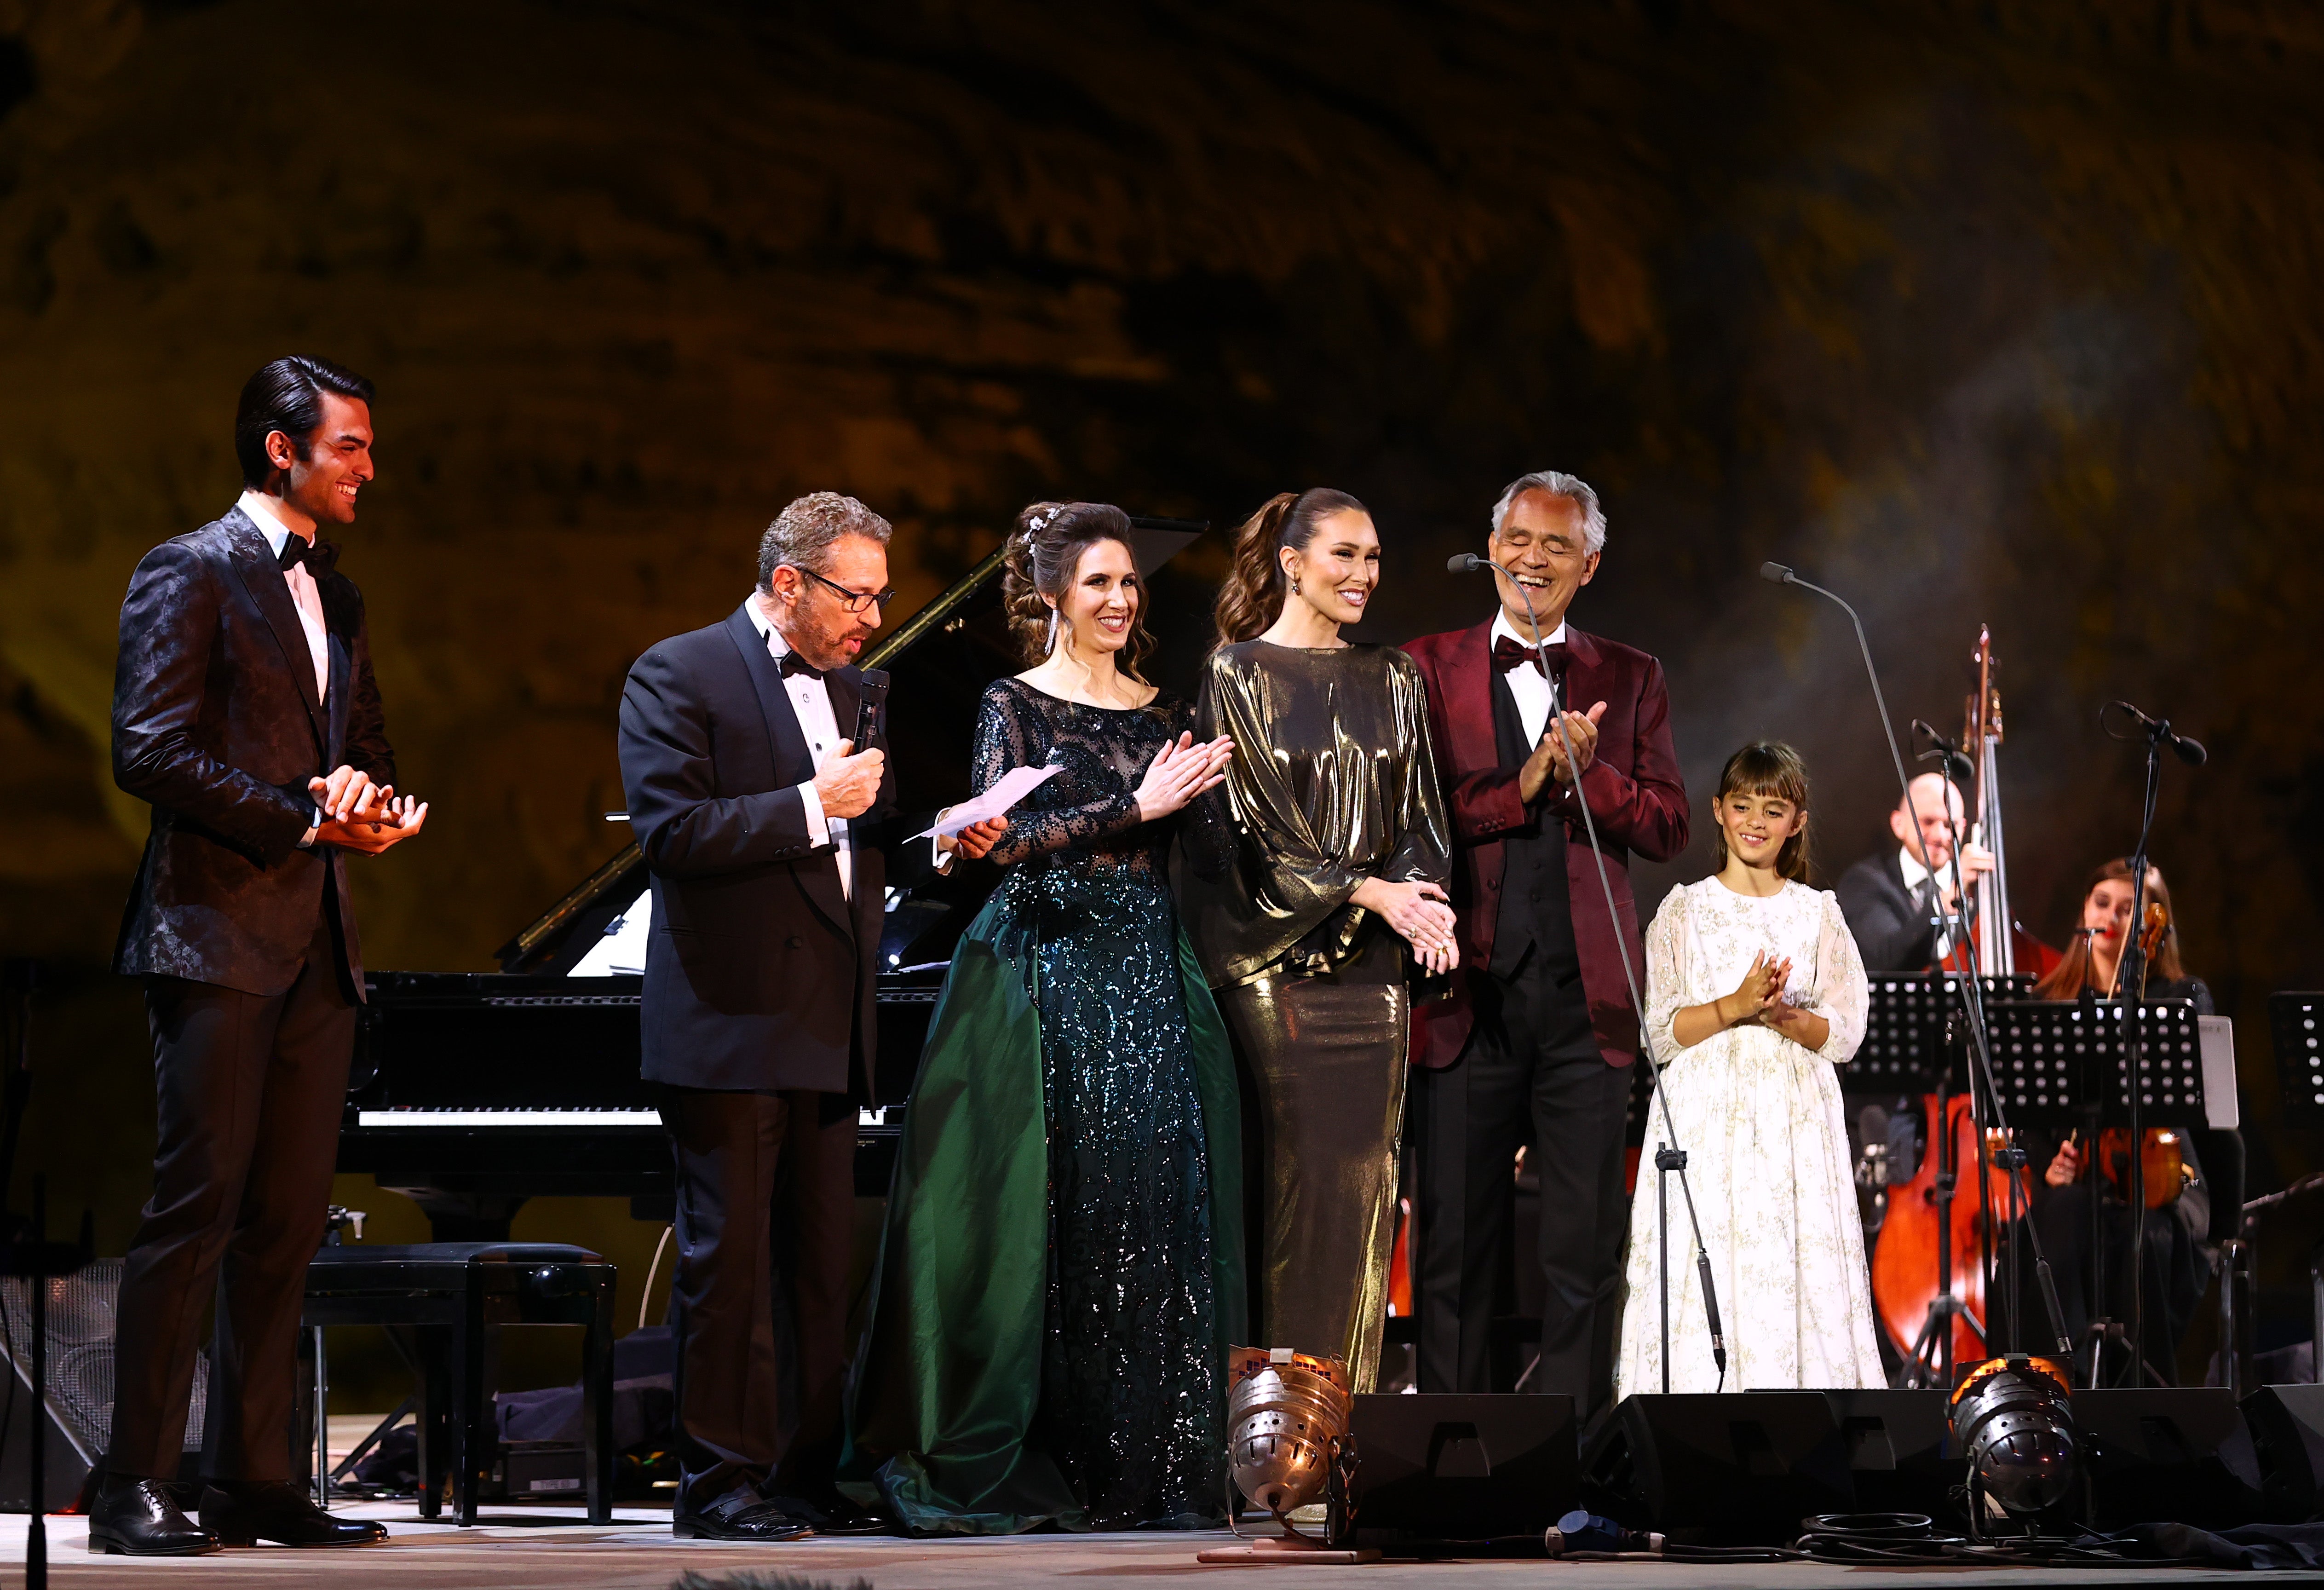 Bocelli was joined by musicians from the Arabian Philharmonic and special guests